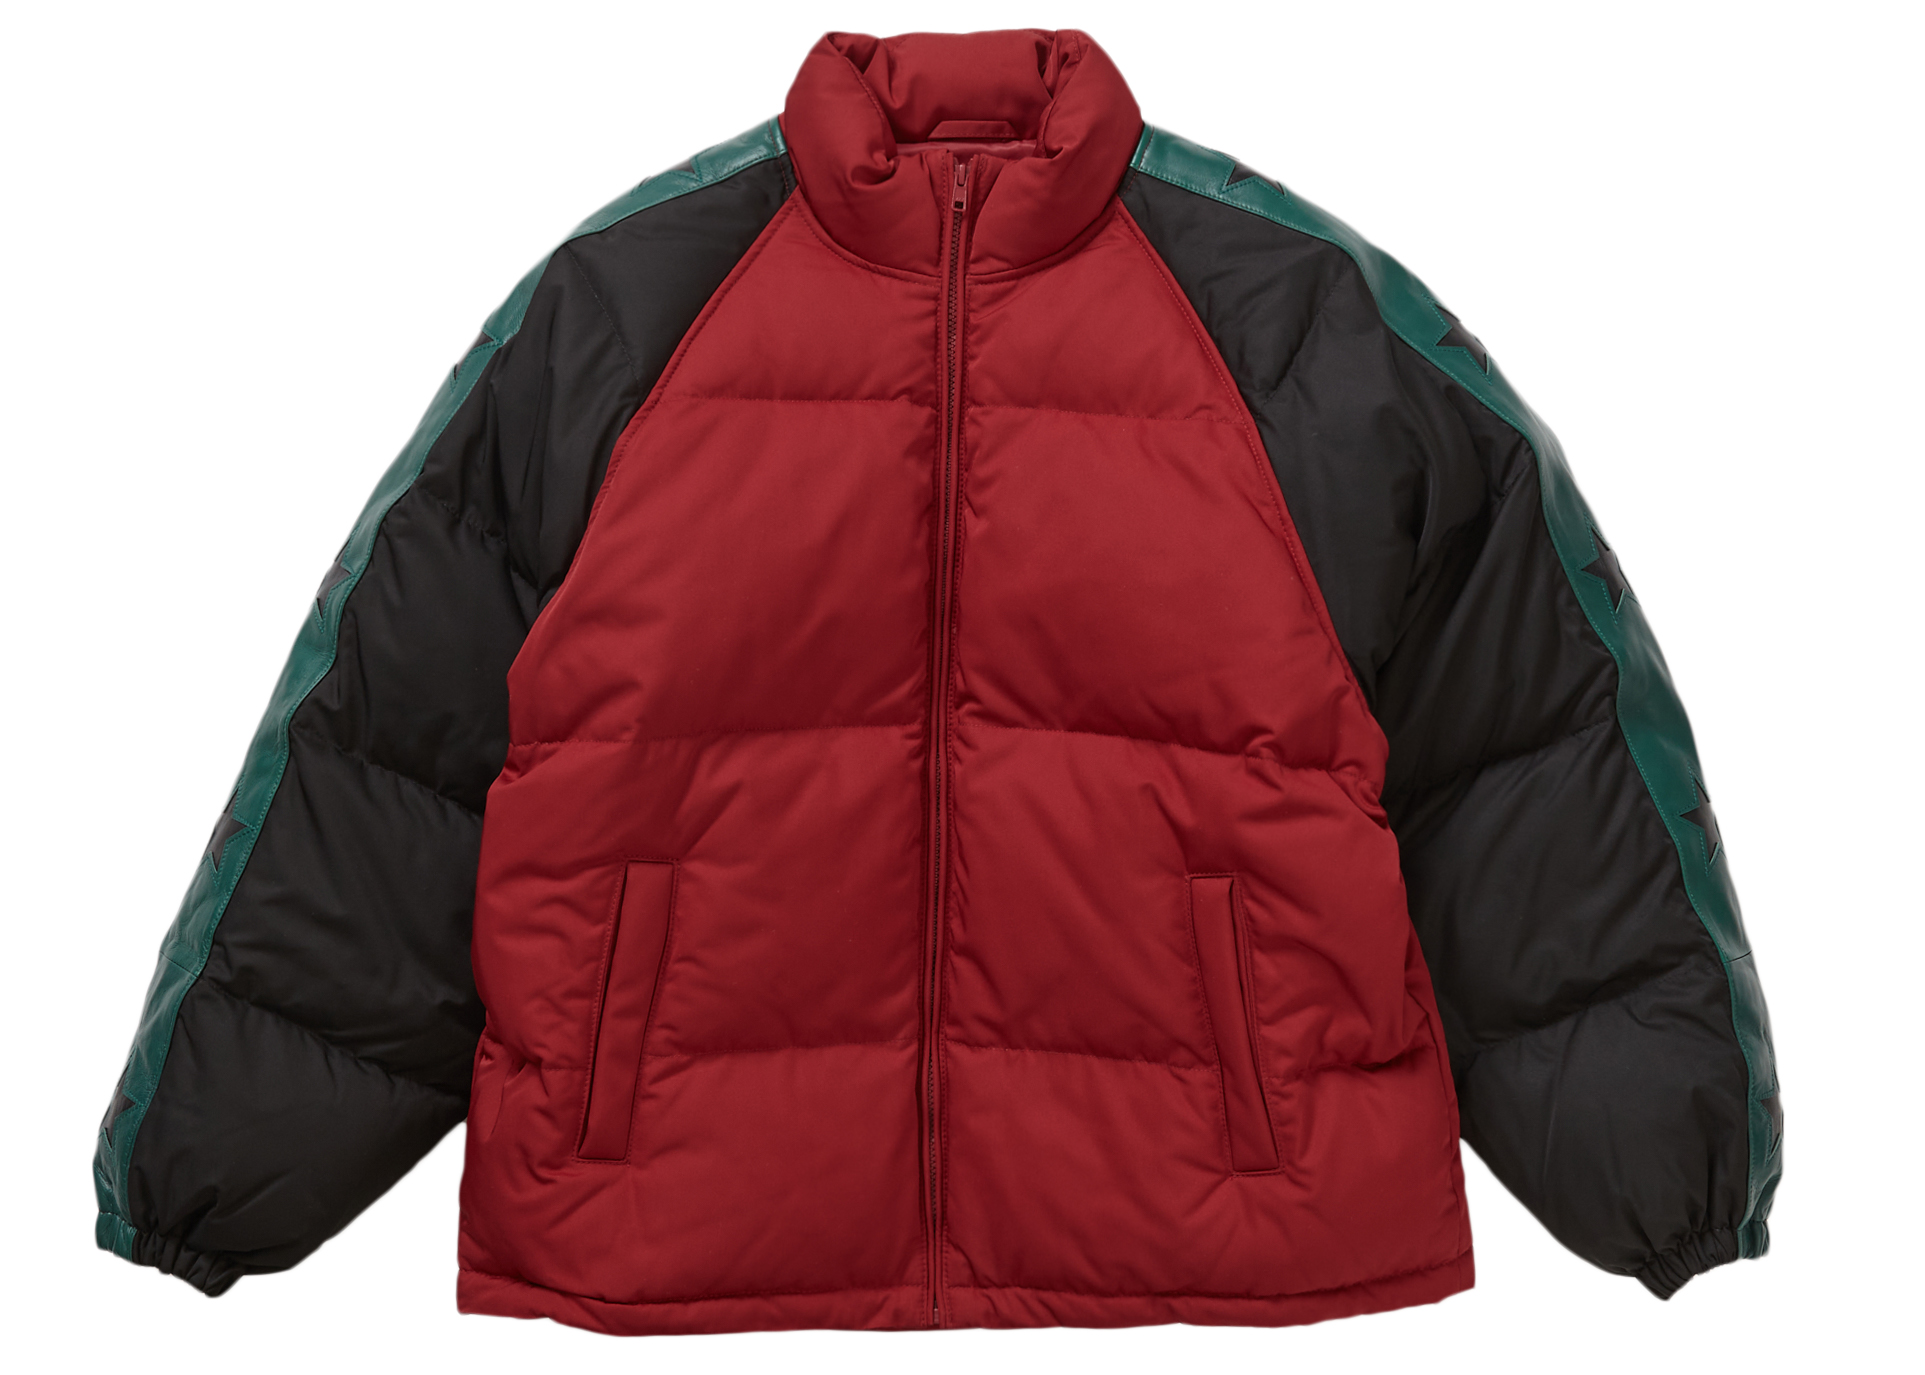 Insulated Down Jackets & Cute Packable Coats For Women